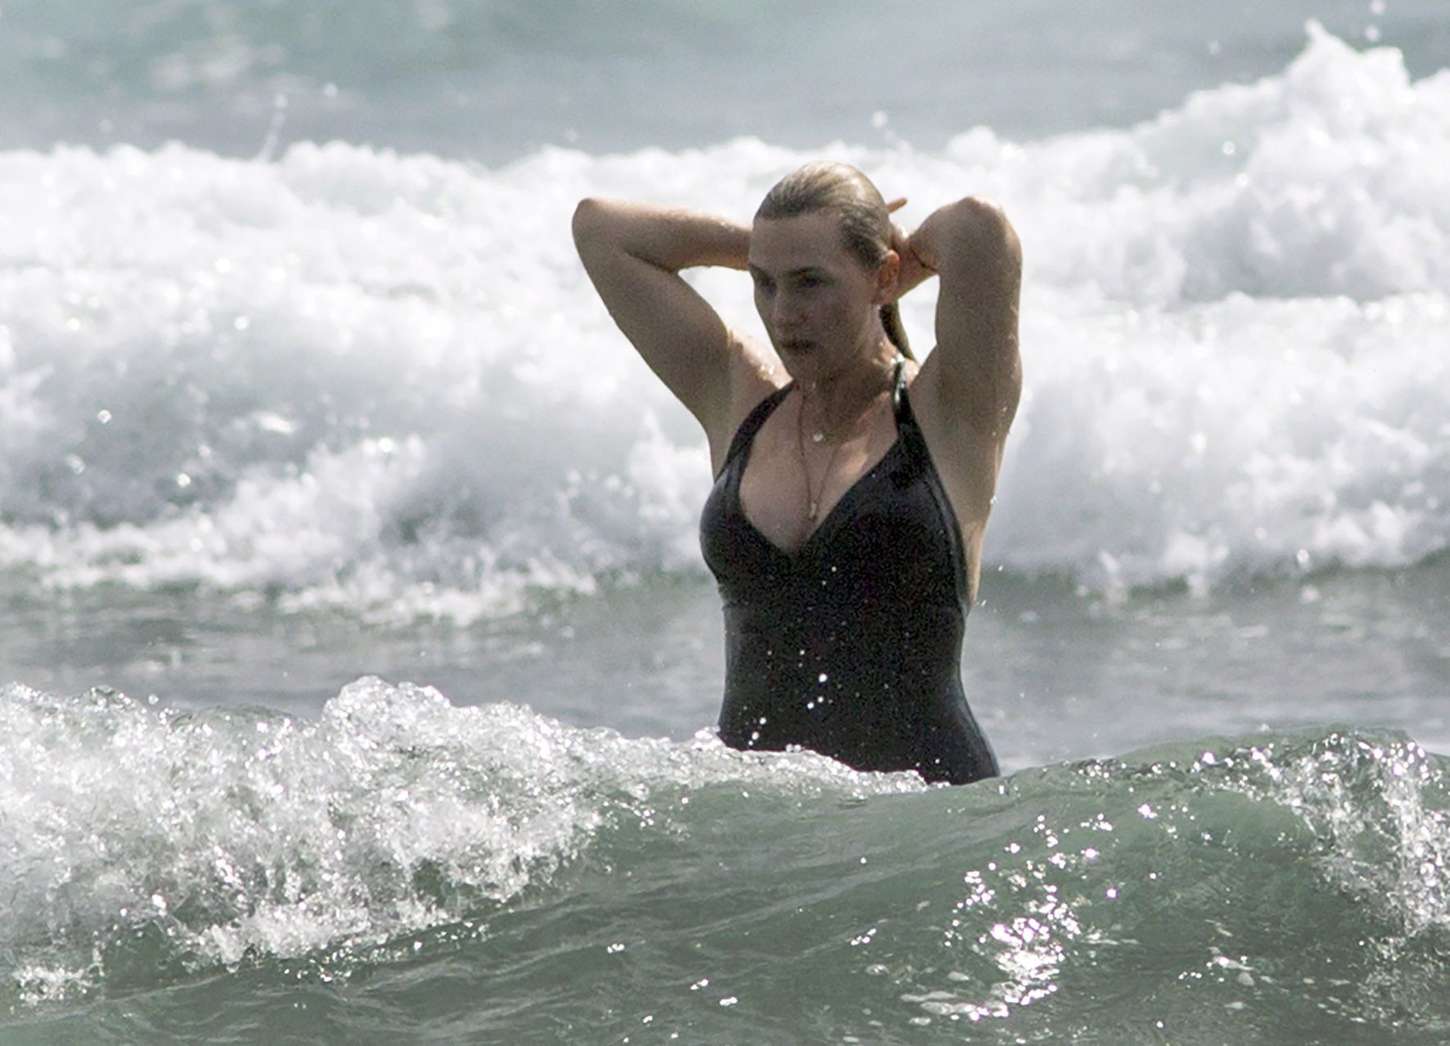 Kate Winslet spend a lovely day in bikini with a cup of tea/coffee.